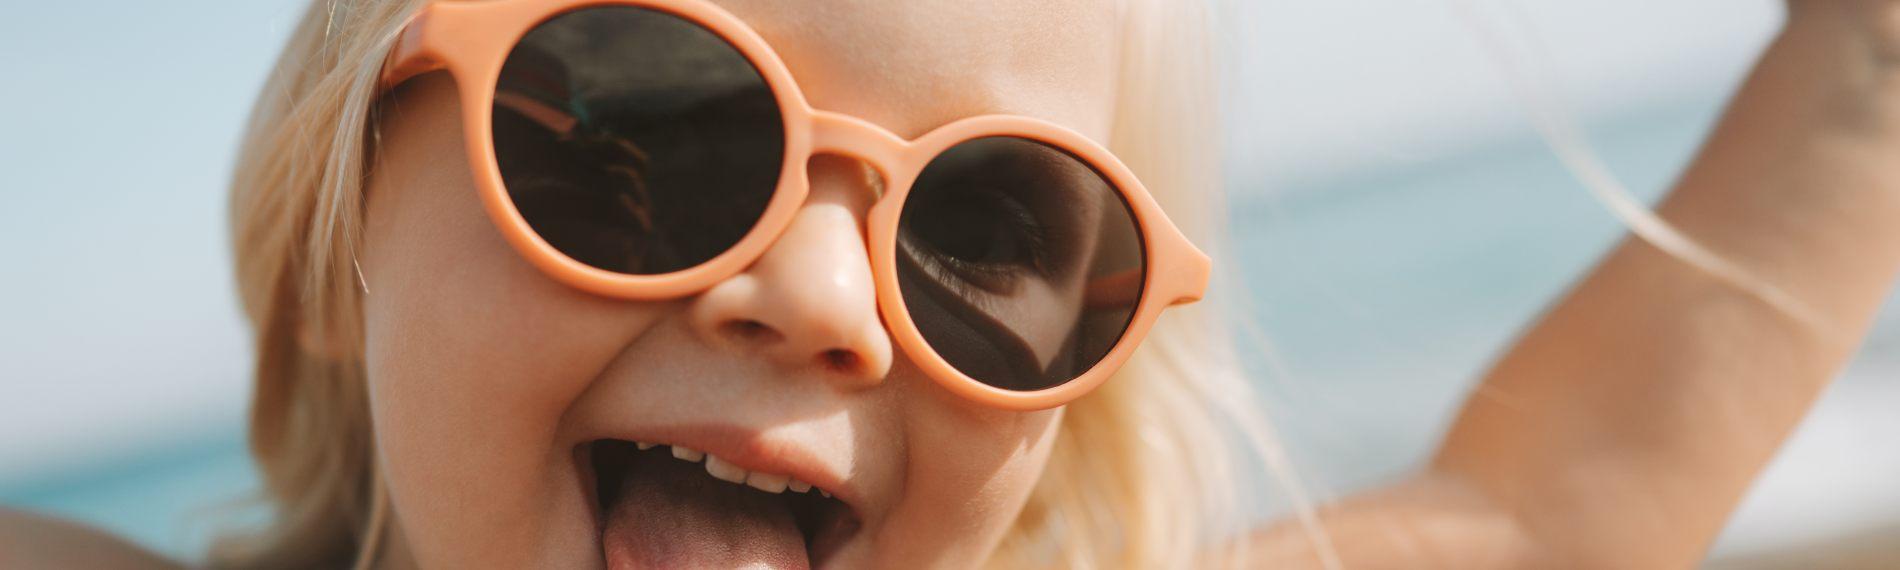 Happy toddler on a beach, wearing peach-framed sunglasses, sticking tongue out and waving arms in the air